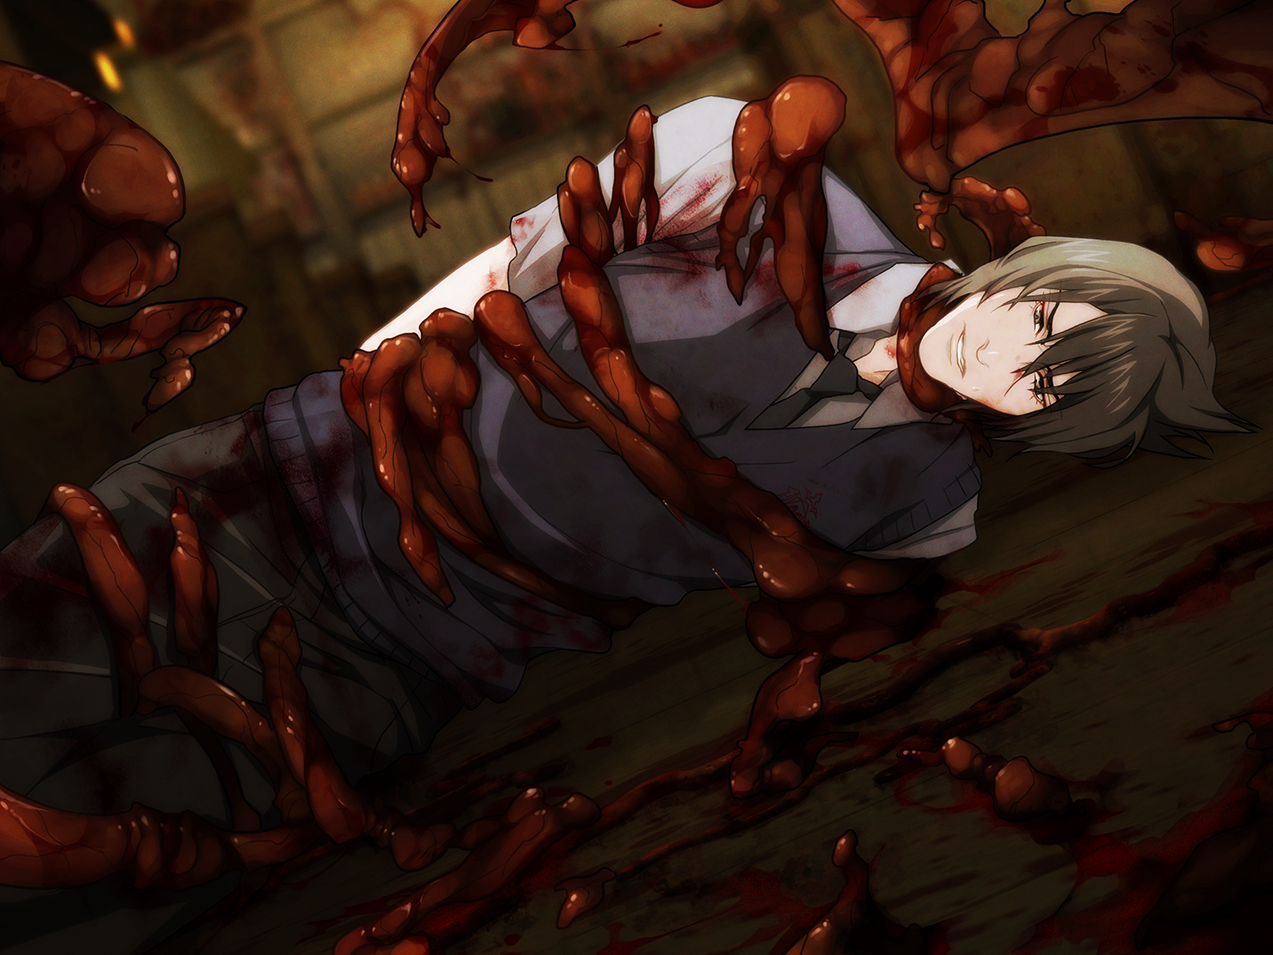 Youji lies bound by meat monsters on the floor of the chem lab.